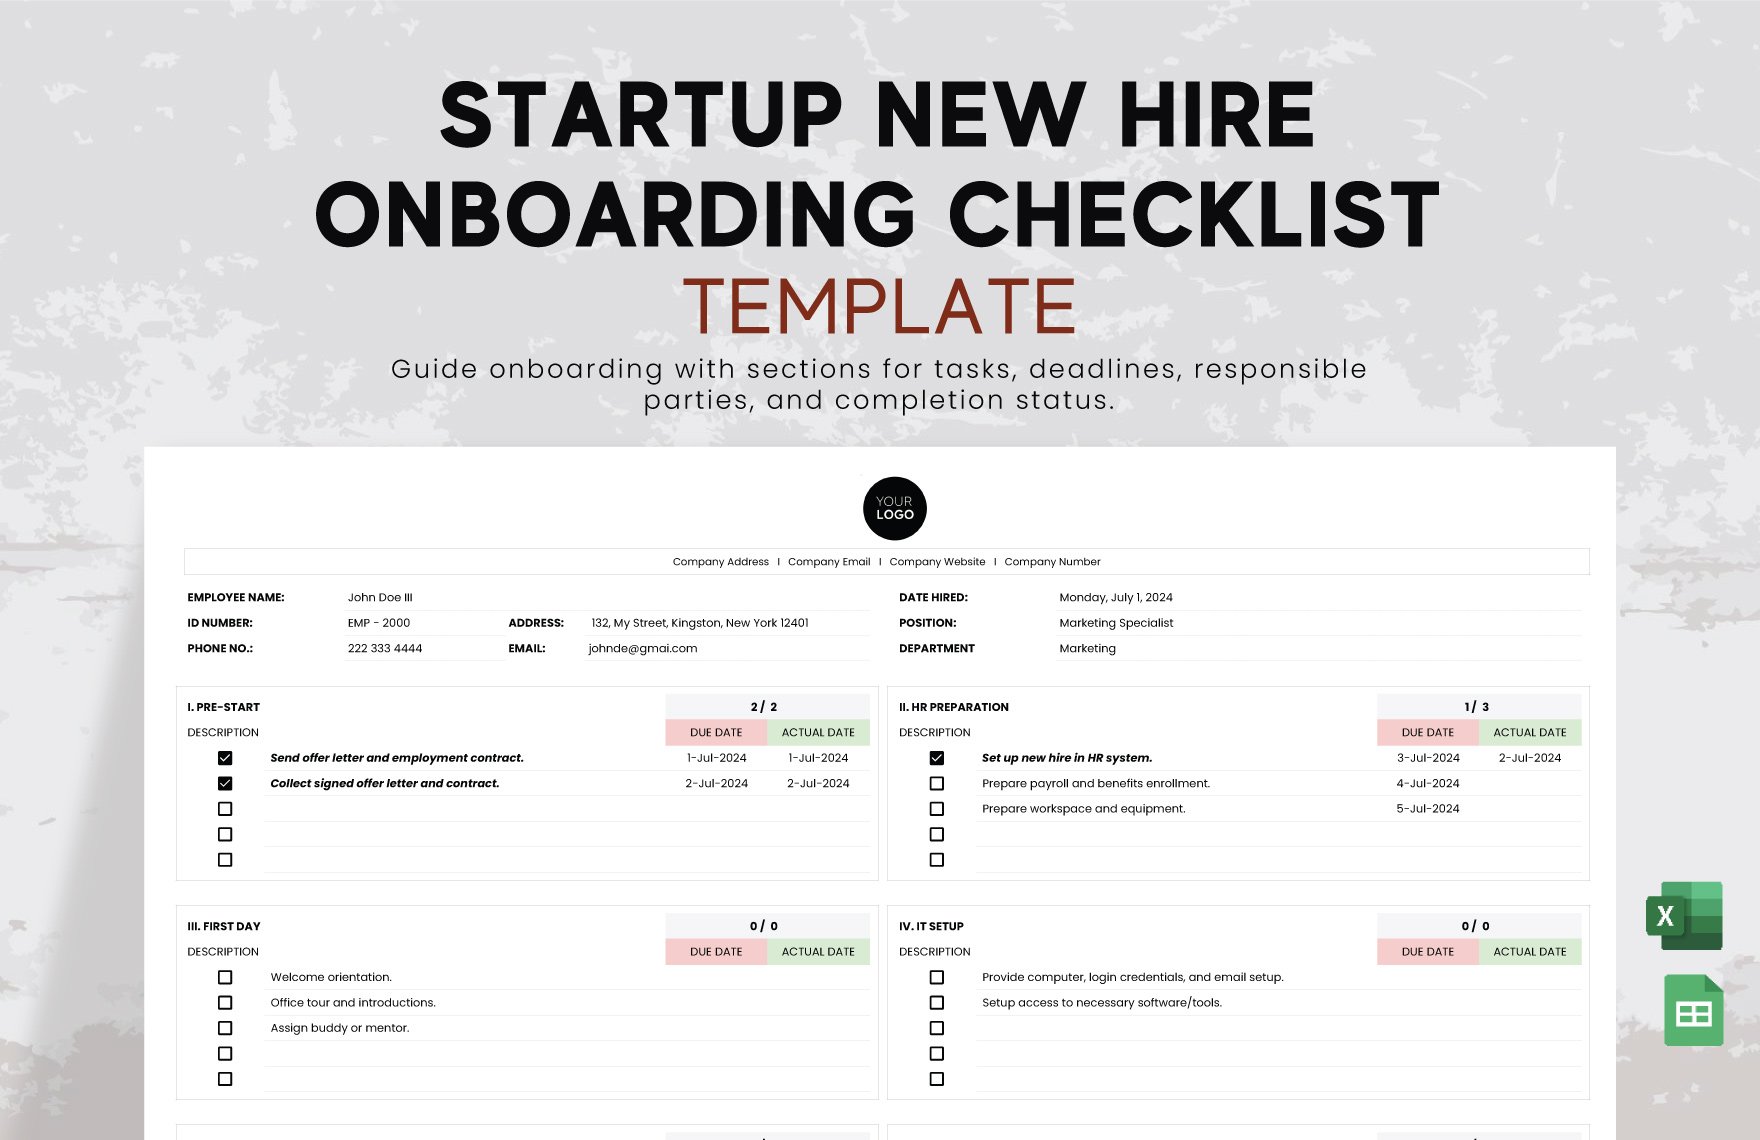 Startup New Hire Onboarding Checklist Template in Excel, Google Sheets